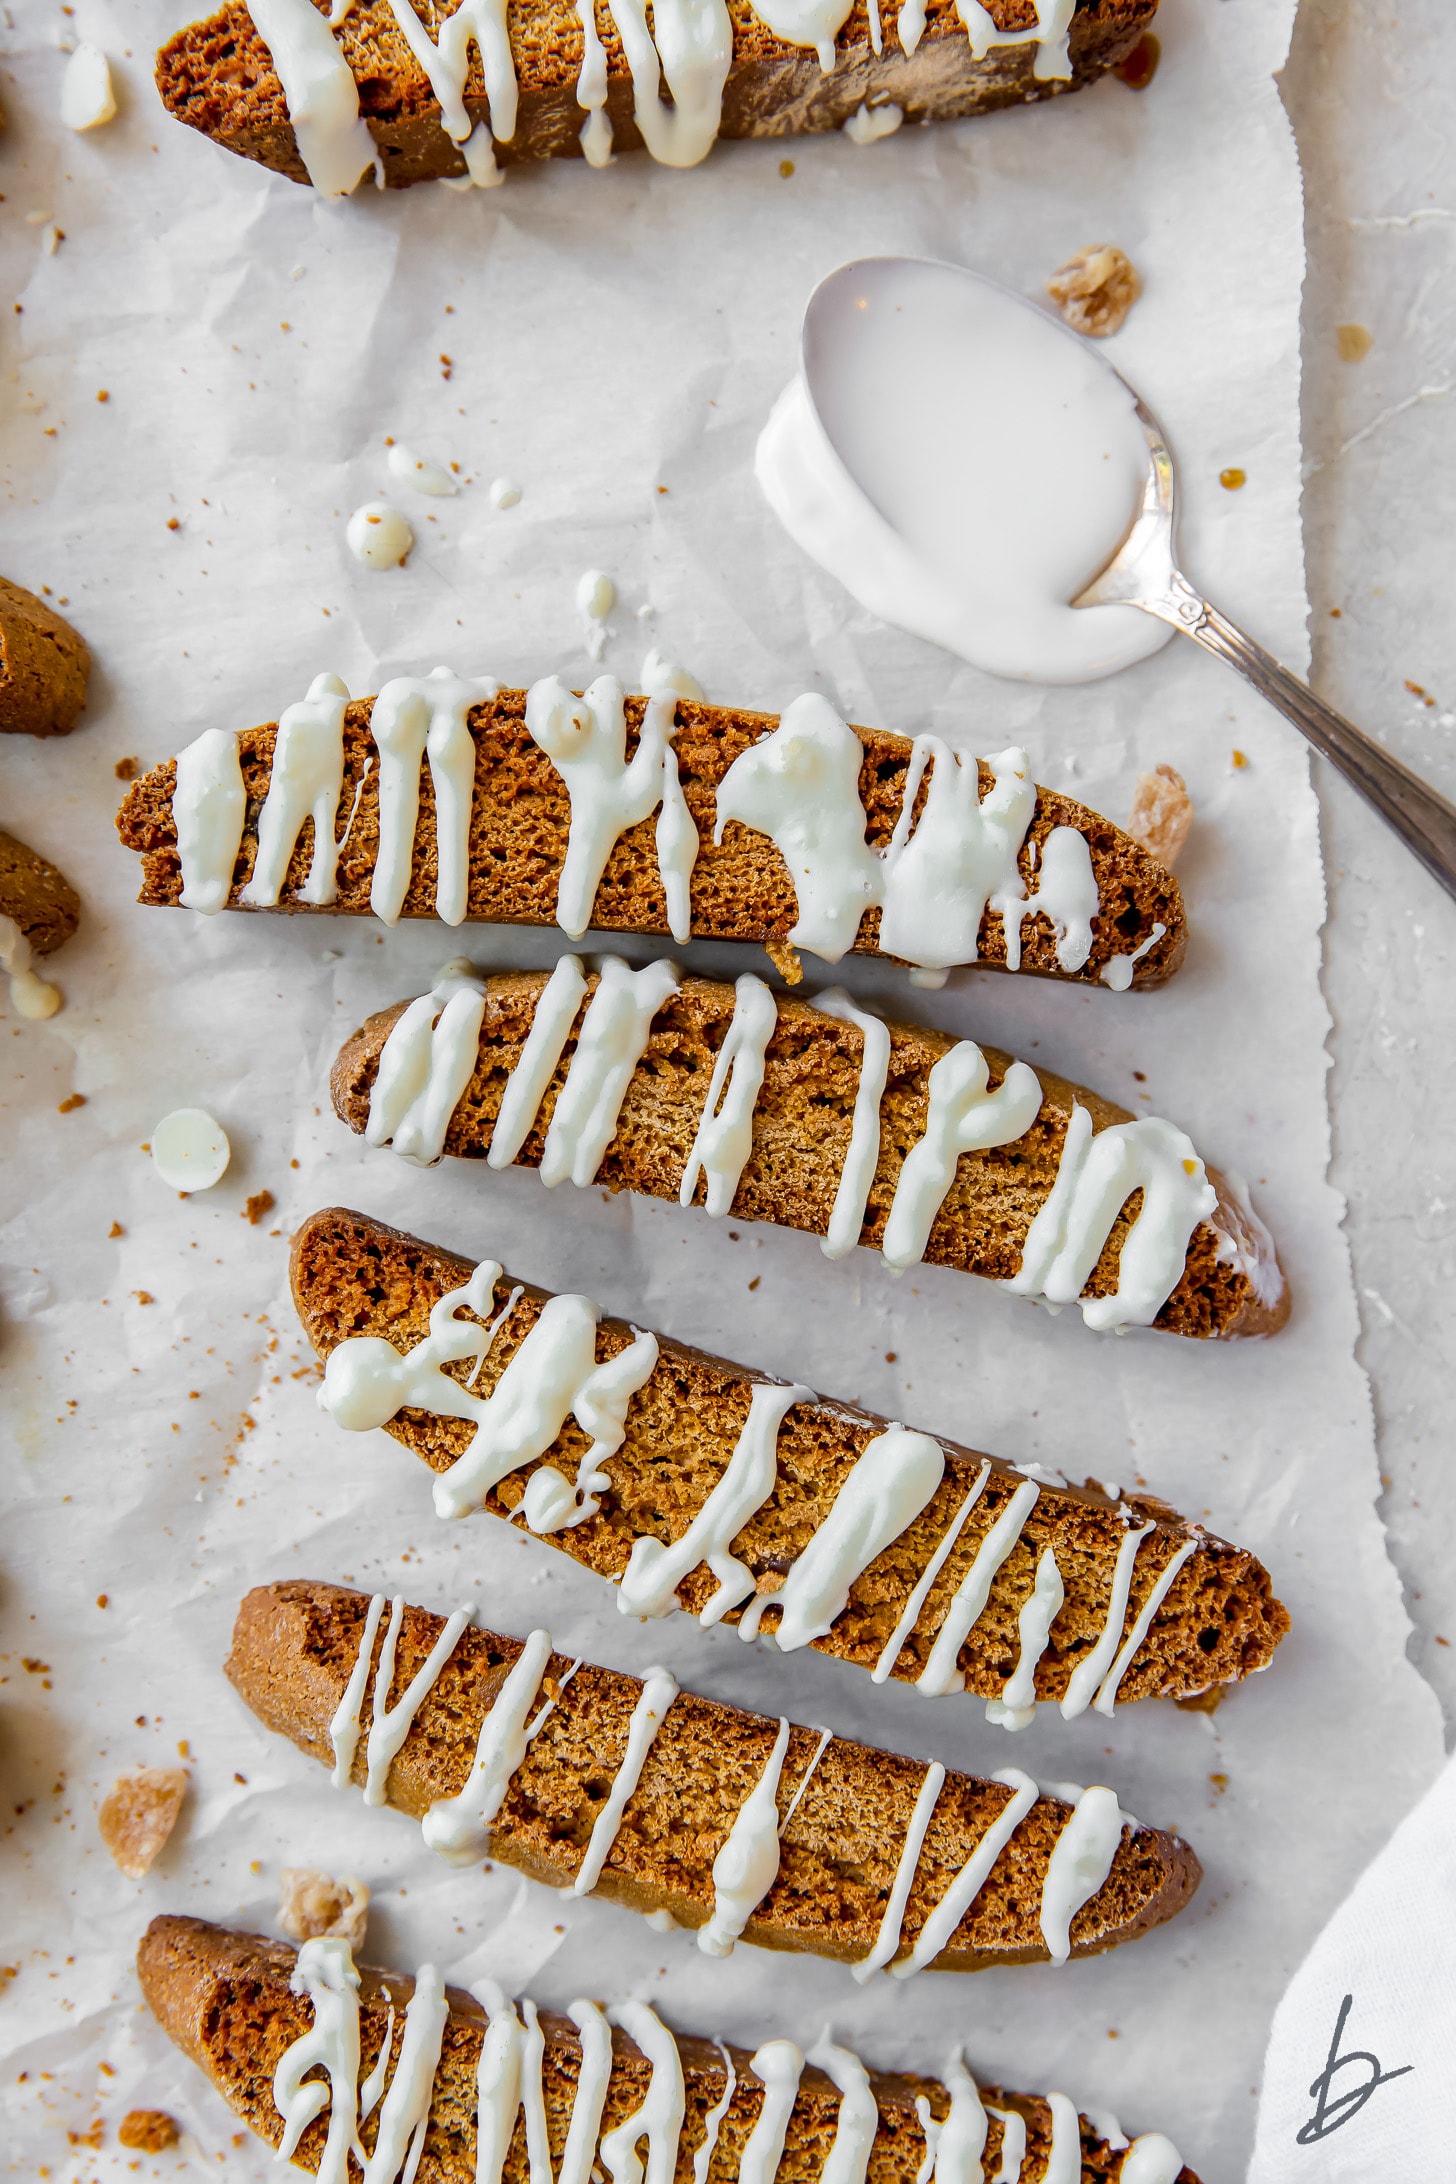 Gingerbread biscotti on wax paper with white chocolate drizzle and spoon of melted white chocolate.